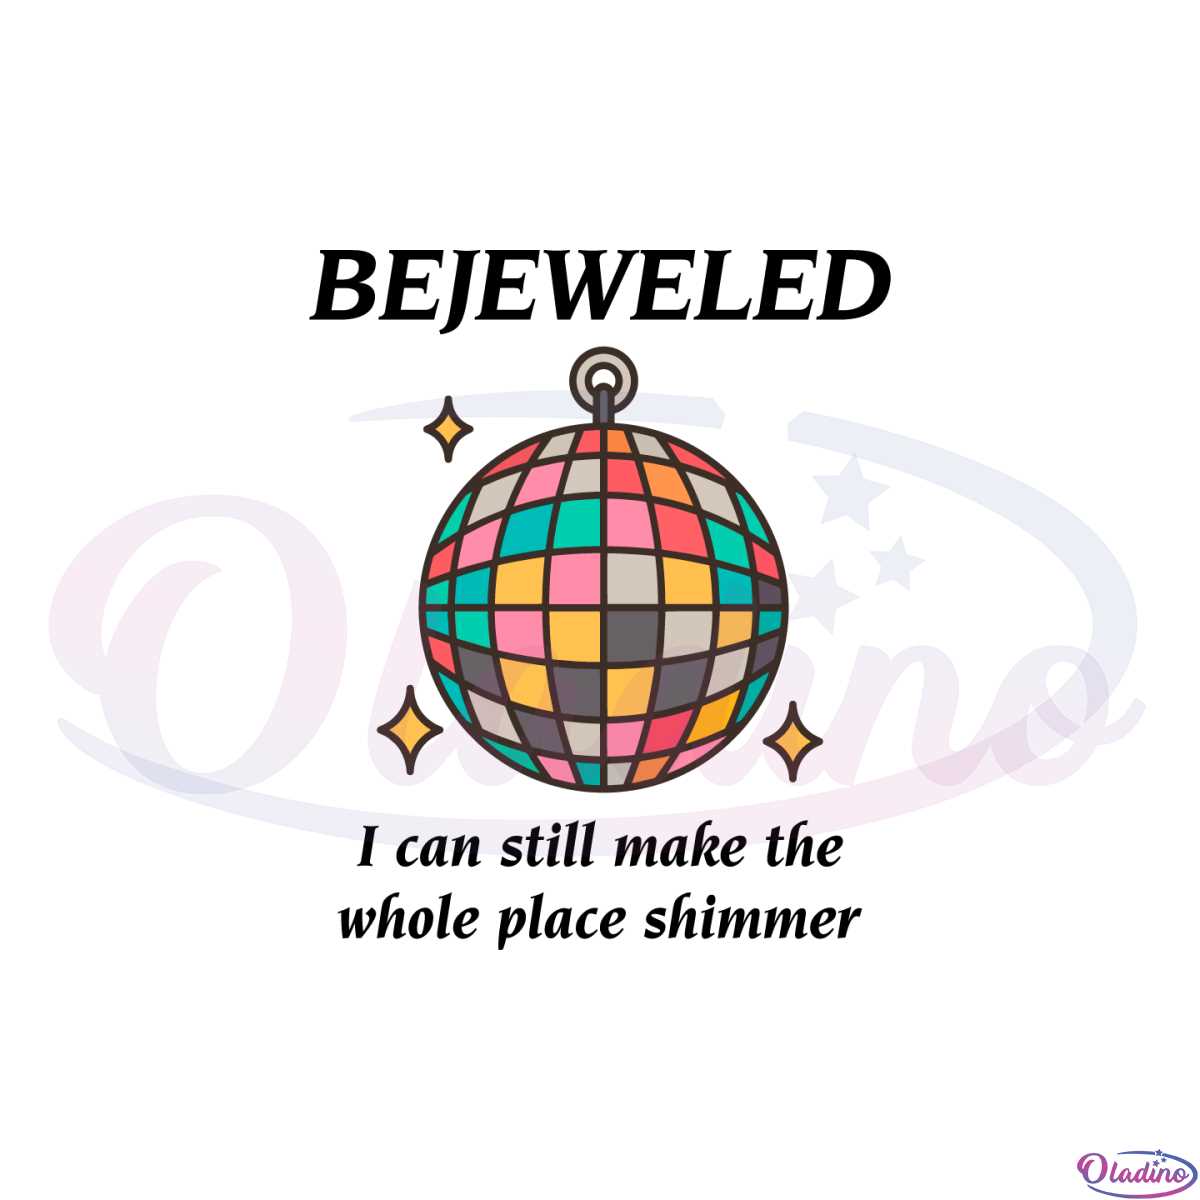 taylor-swift-bejeweled-i-can-still-make-the-whole-place-shimmer-svg